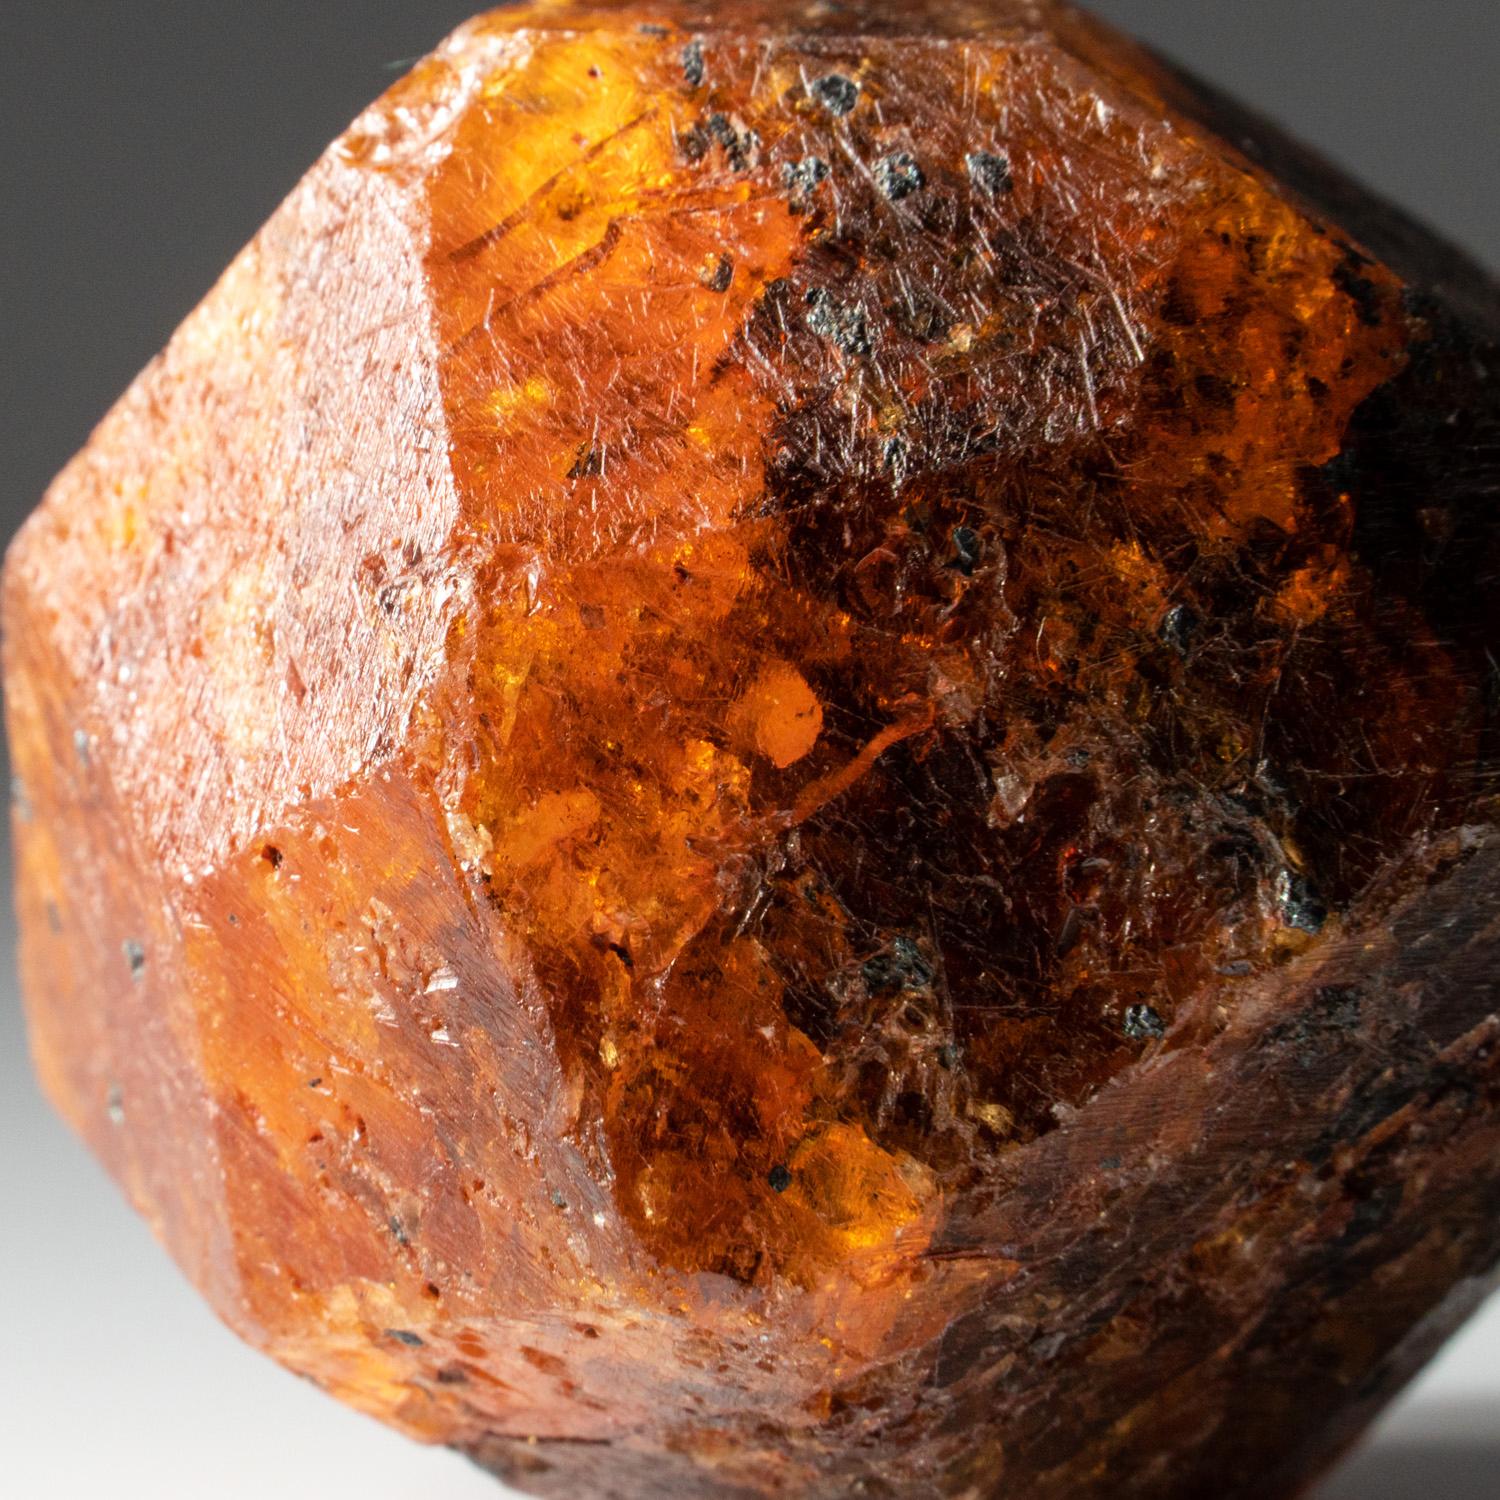 Spessartine Garnet Crystal from Loliondo, Arusha, Tanzania In New Condition For Sale In New York, NY